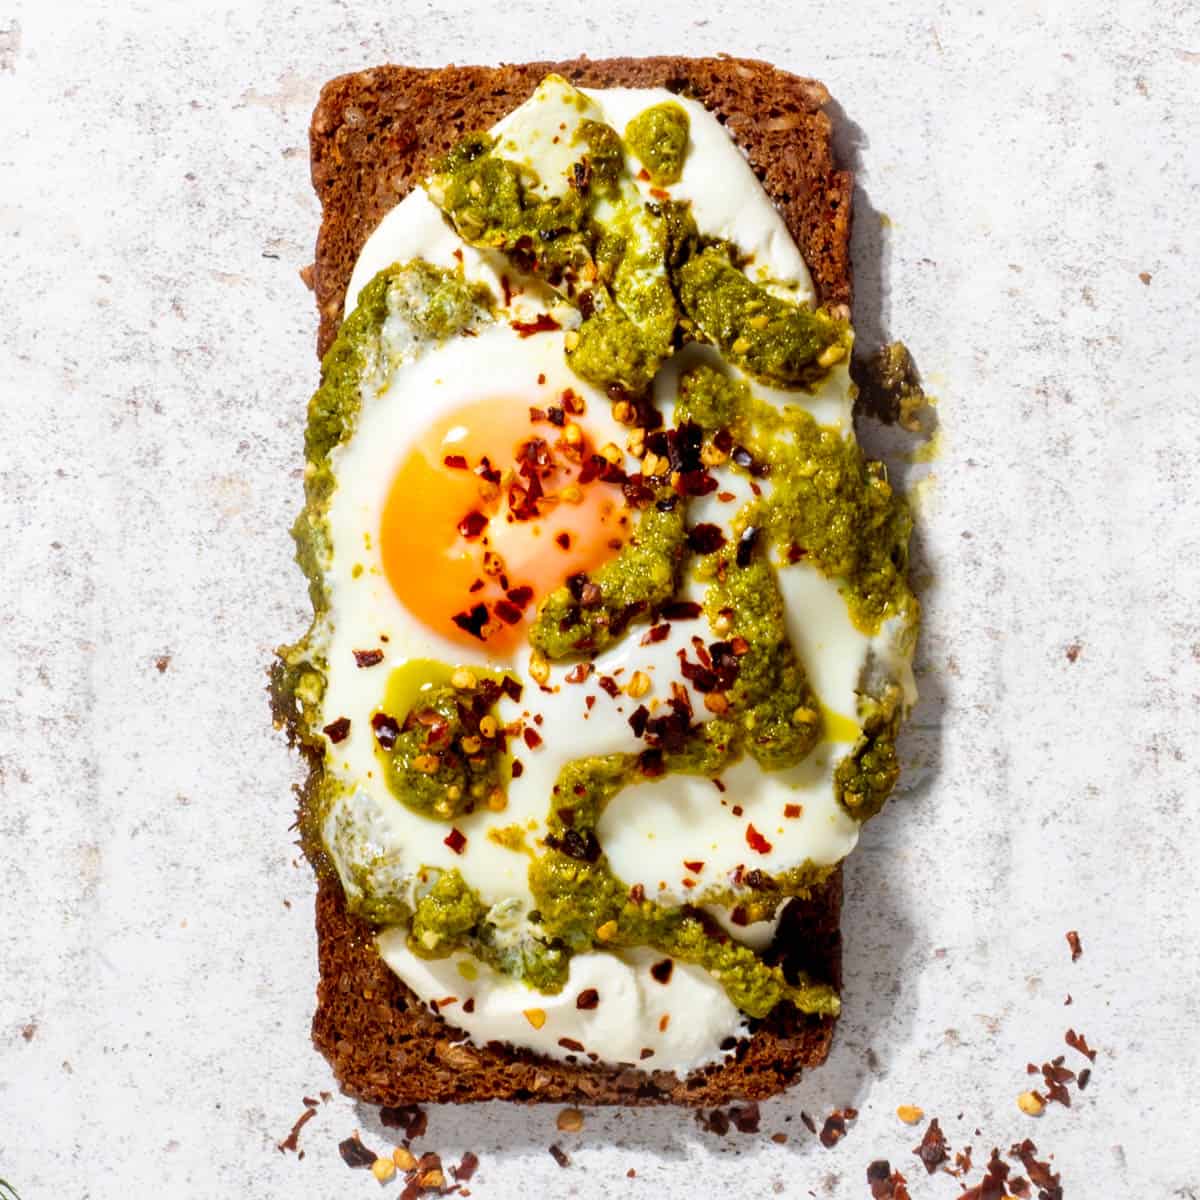 Cottage cheese toast with fried egg and pesto topping.